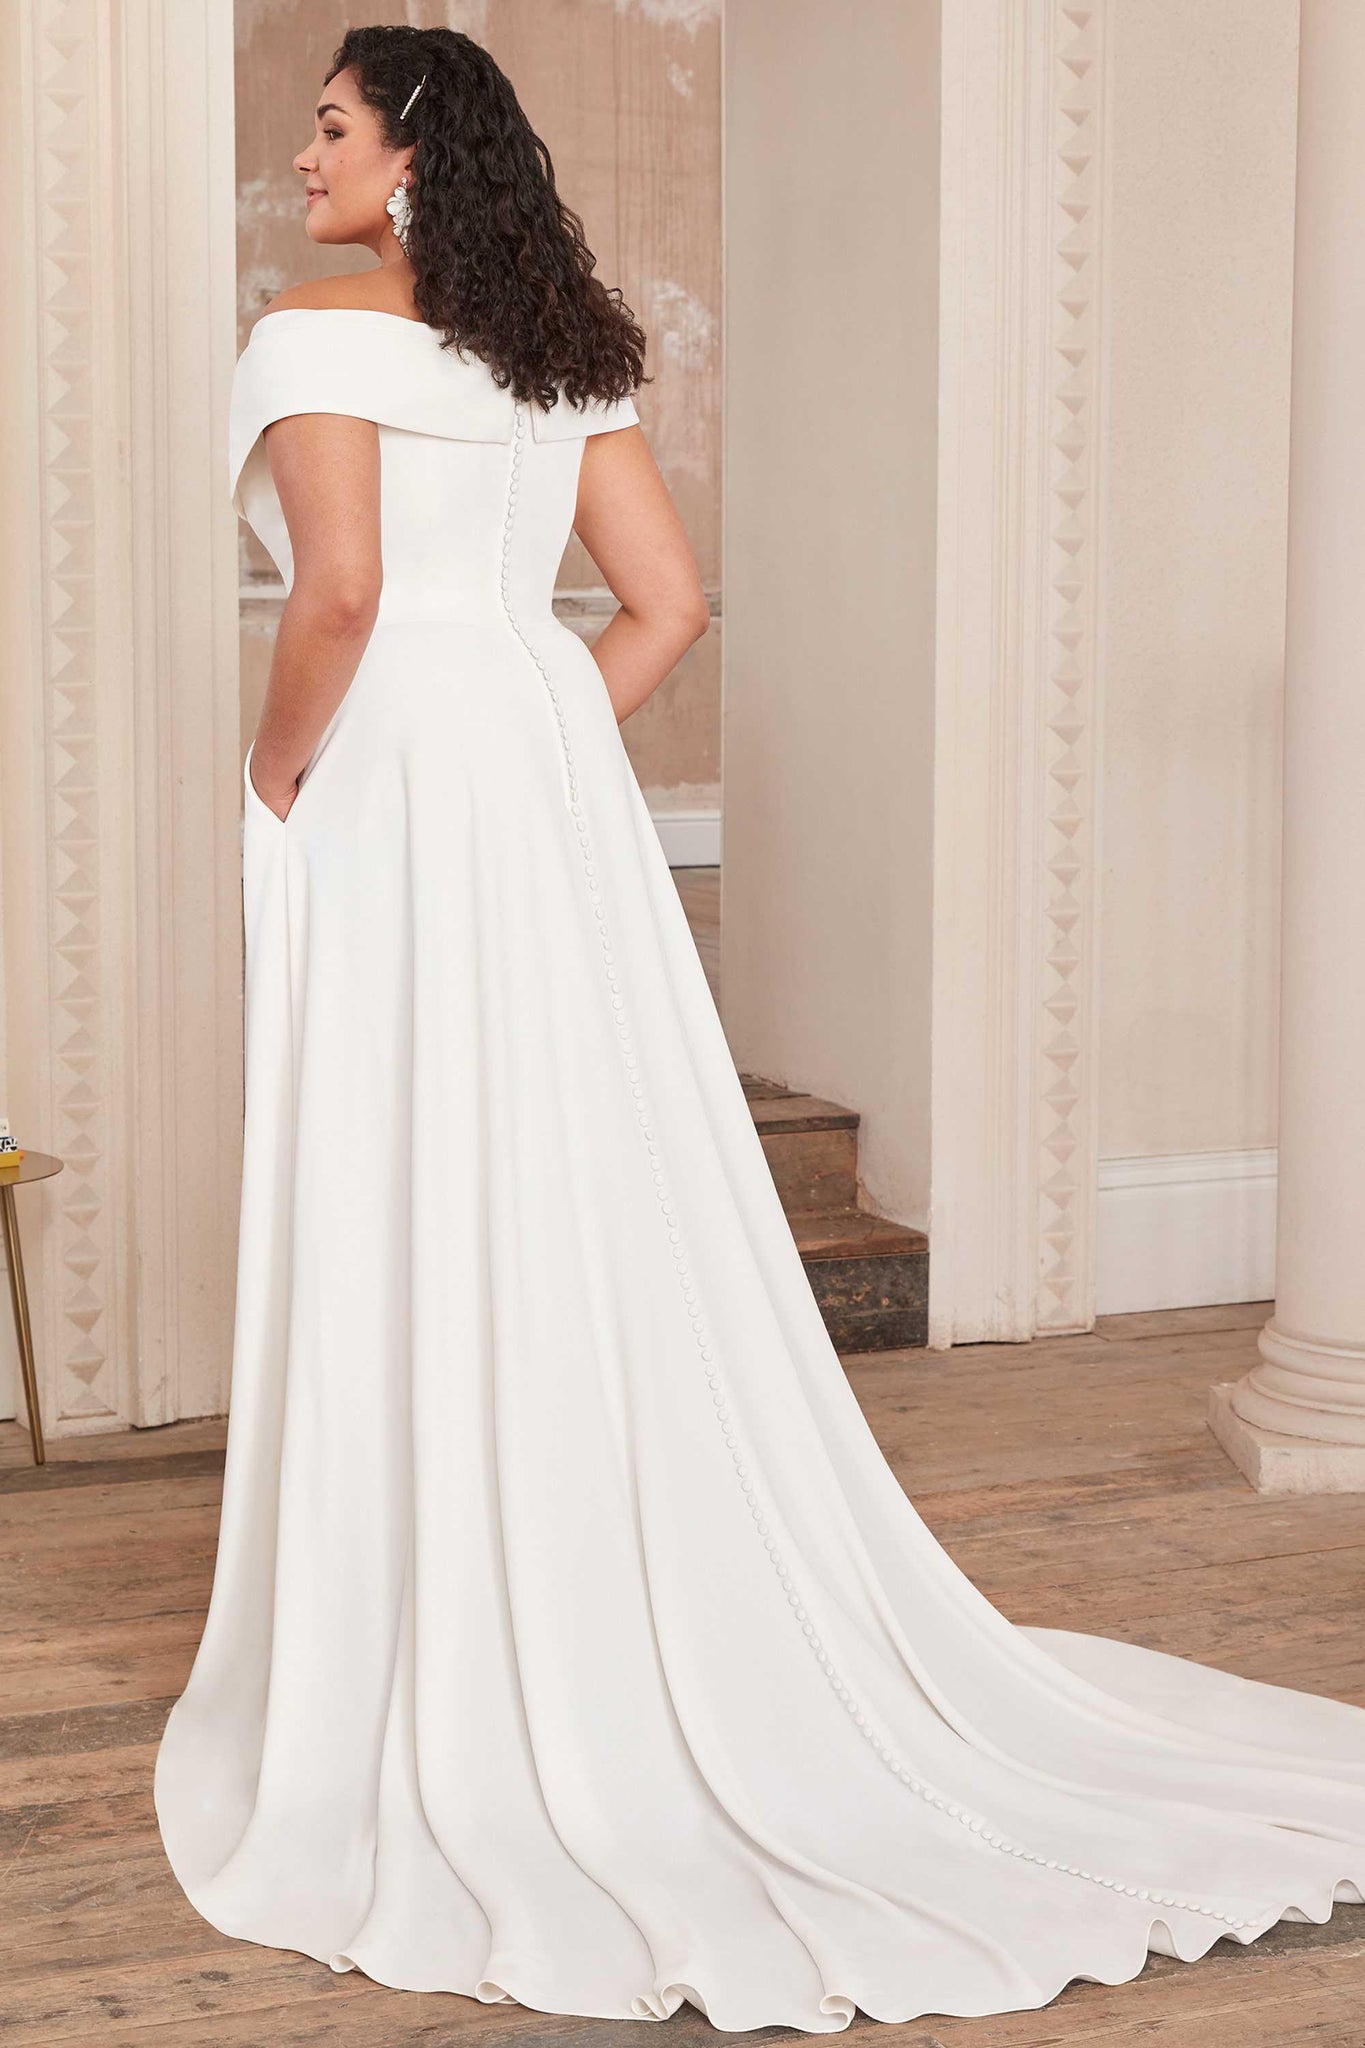 UK22 Celine - Adore Bridal and Occasion Wear